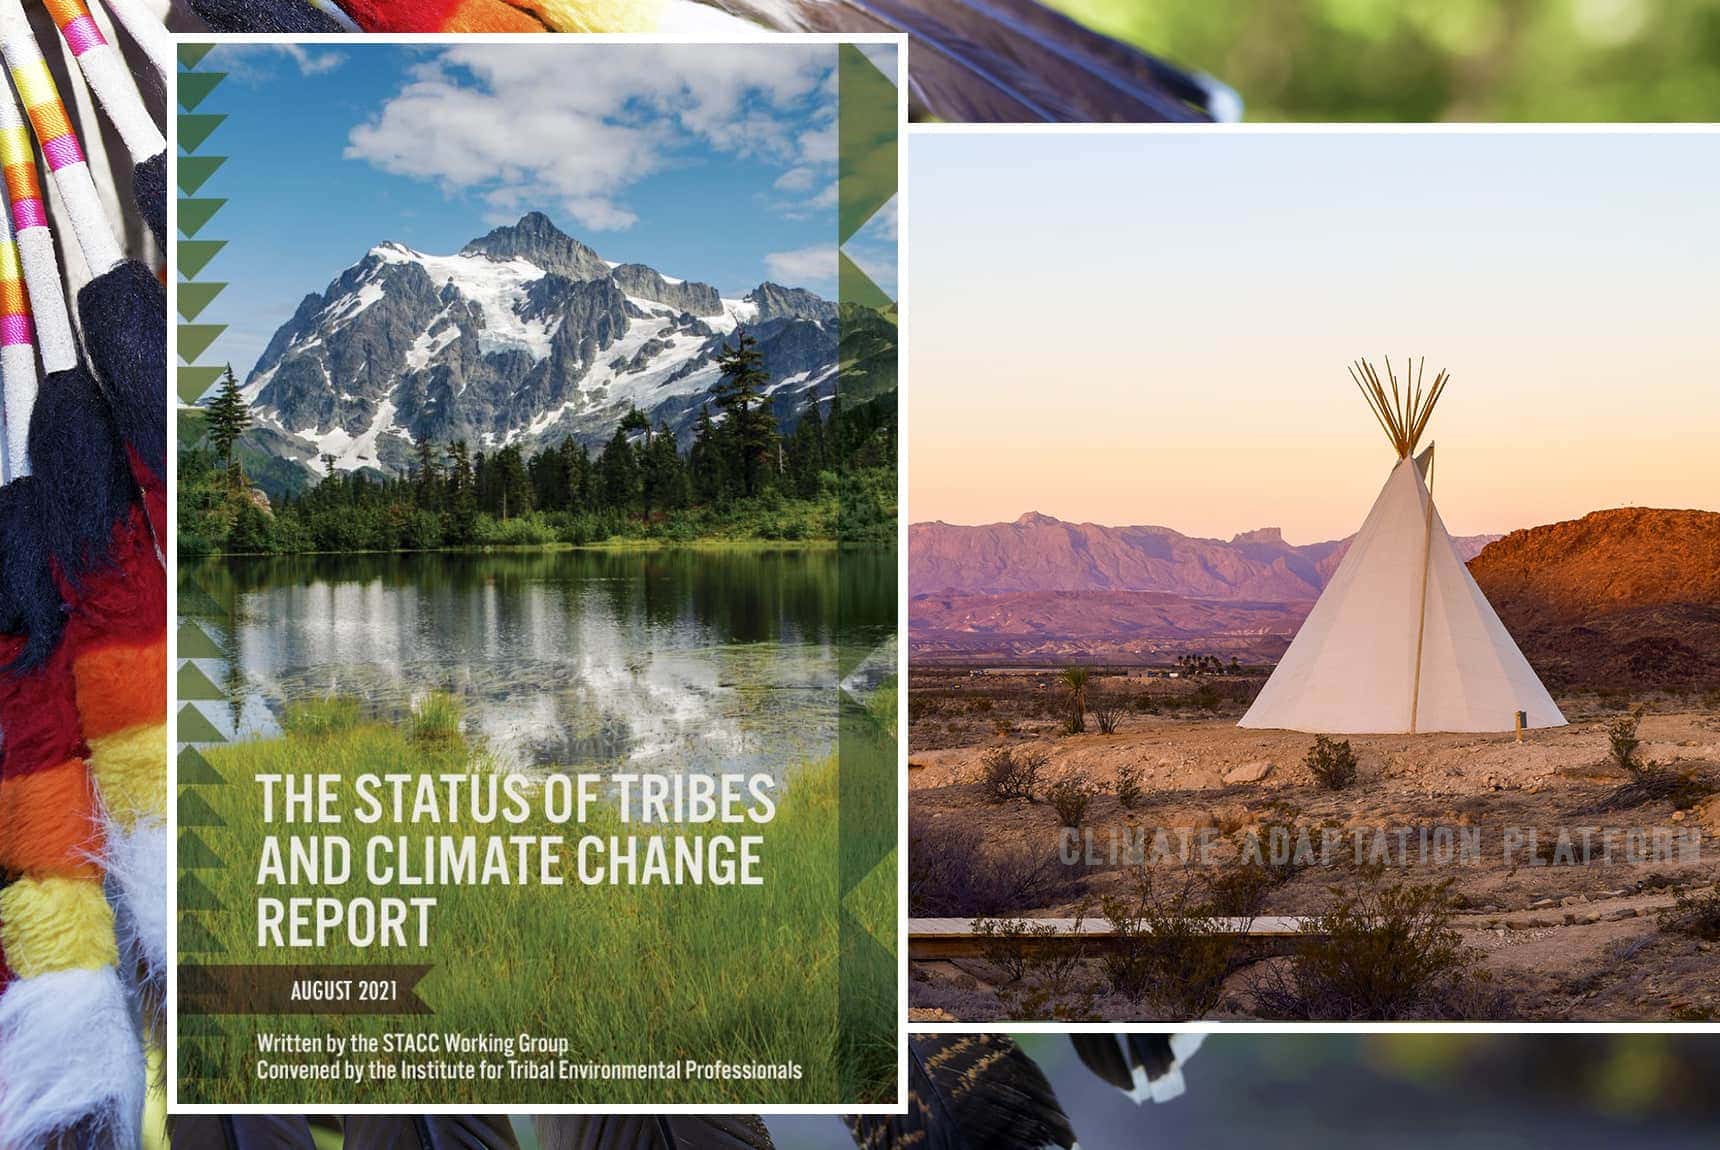 Status of Tribes and Climate Change (STACC) Report